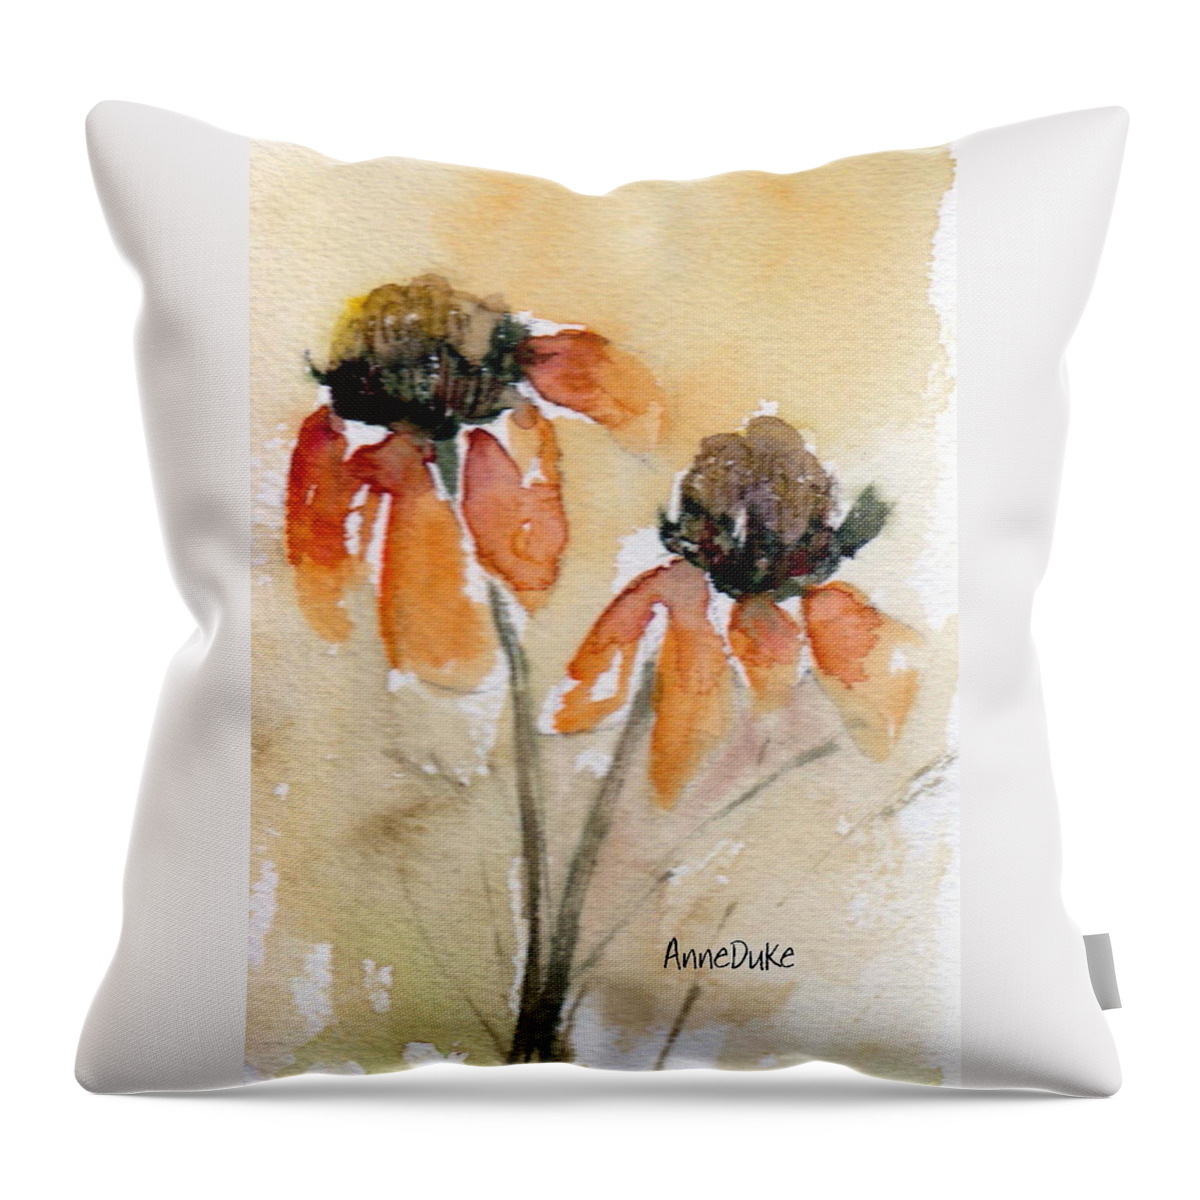 Watercolor Throw Pillow featuring the painting Summer Sunflowers by Anne Duke